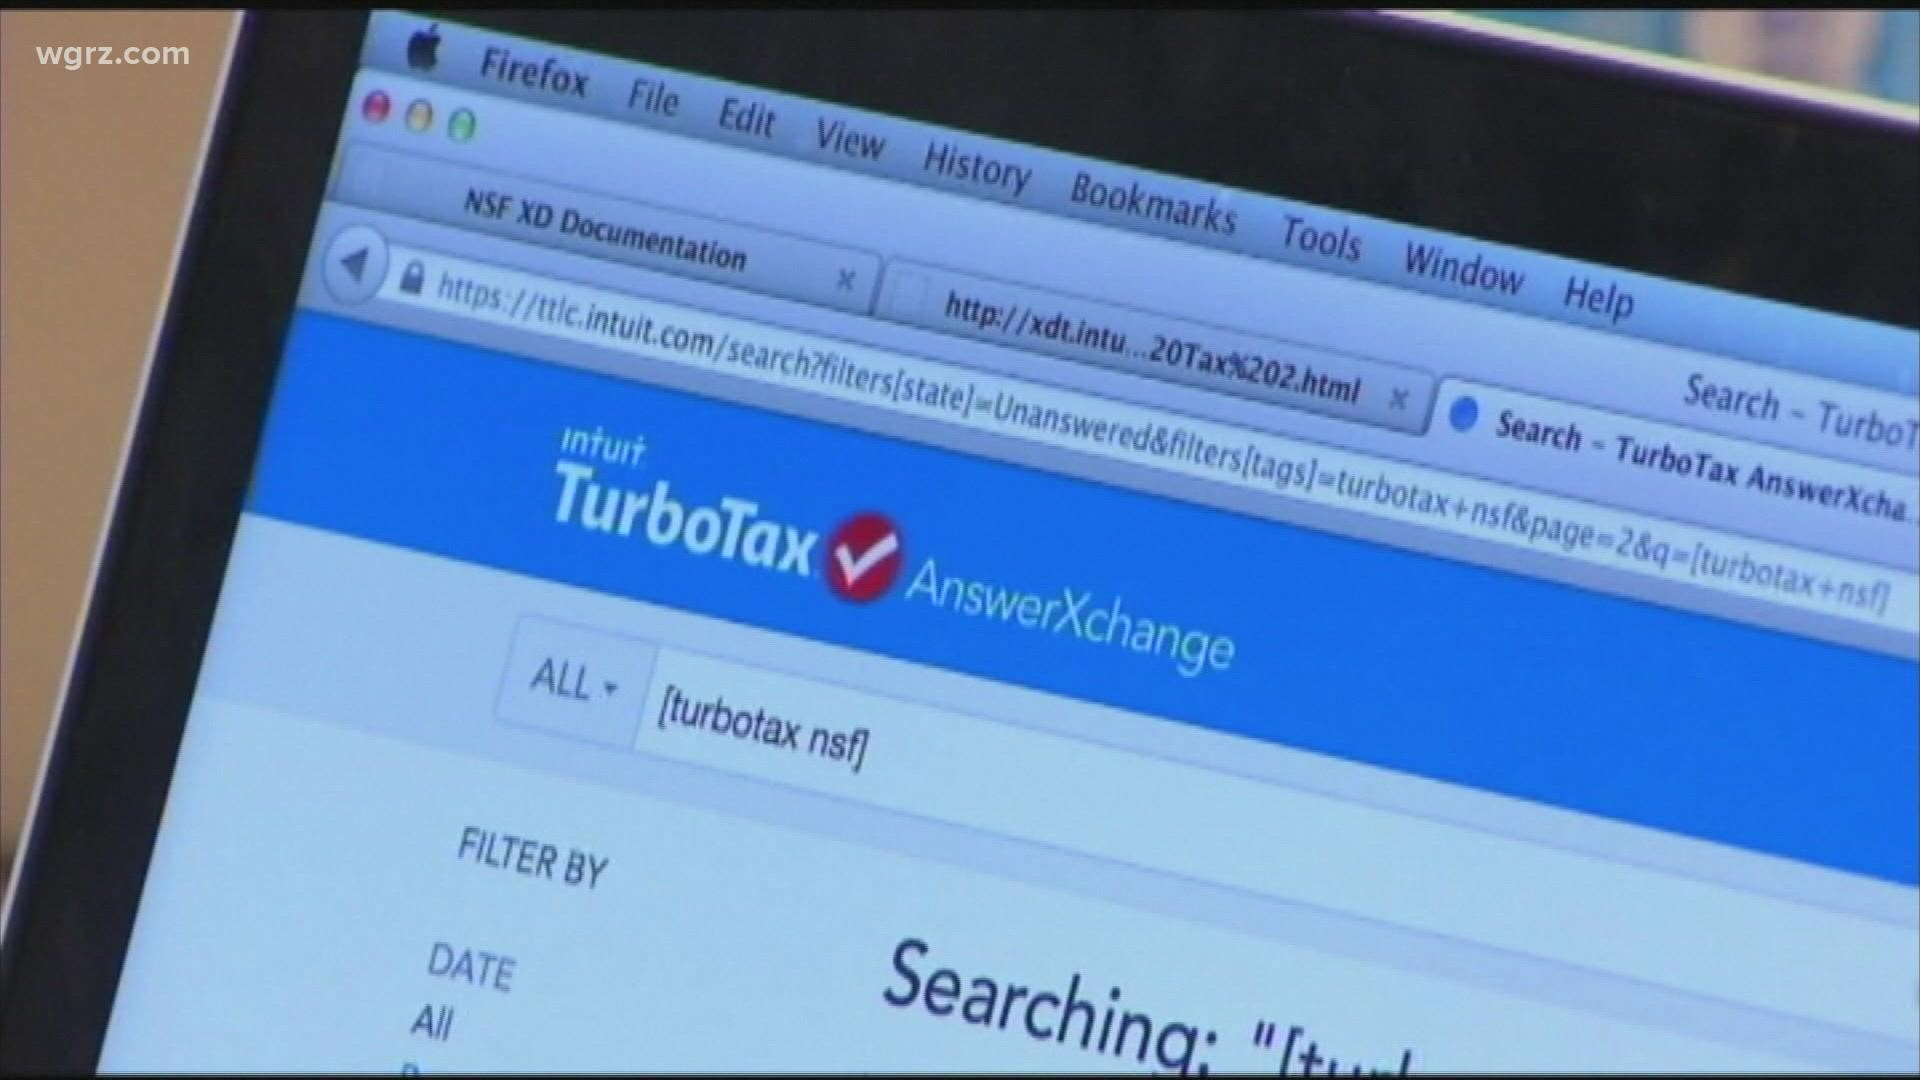 Turbotax settles for $141M over "free" claims